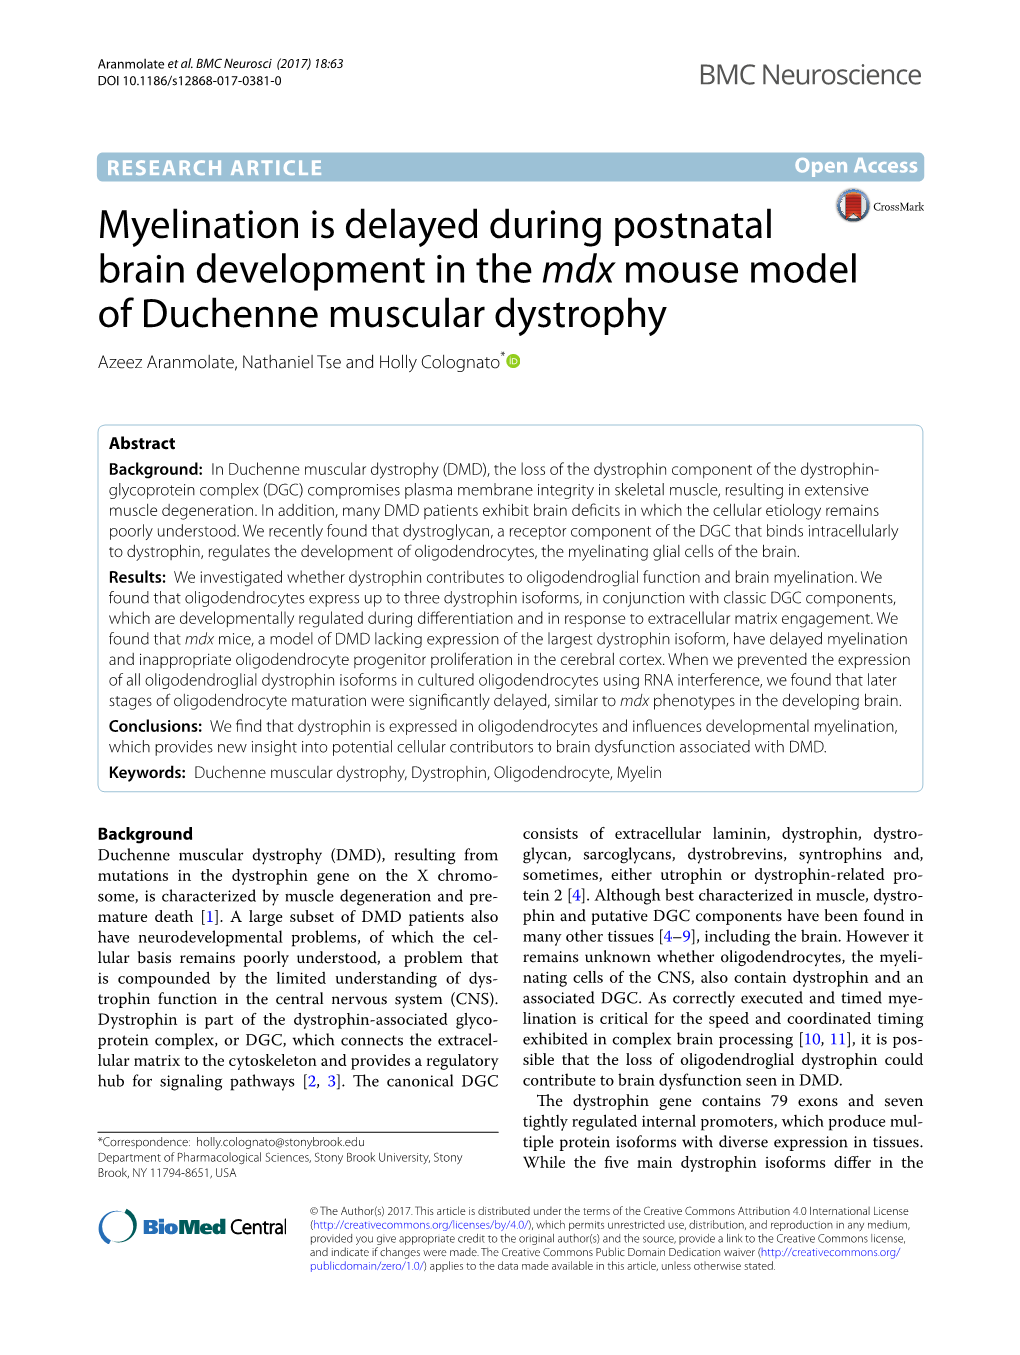 Myelination Is Delayed During Postnatal Brain Development in the Mdx Mouse Model of Duchenne Muscular Dystrophy Azeez Aranmolate, Nathaniel Tse and Holly Colognato*